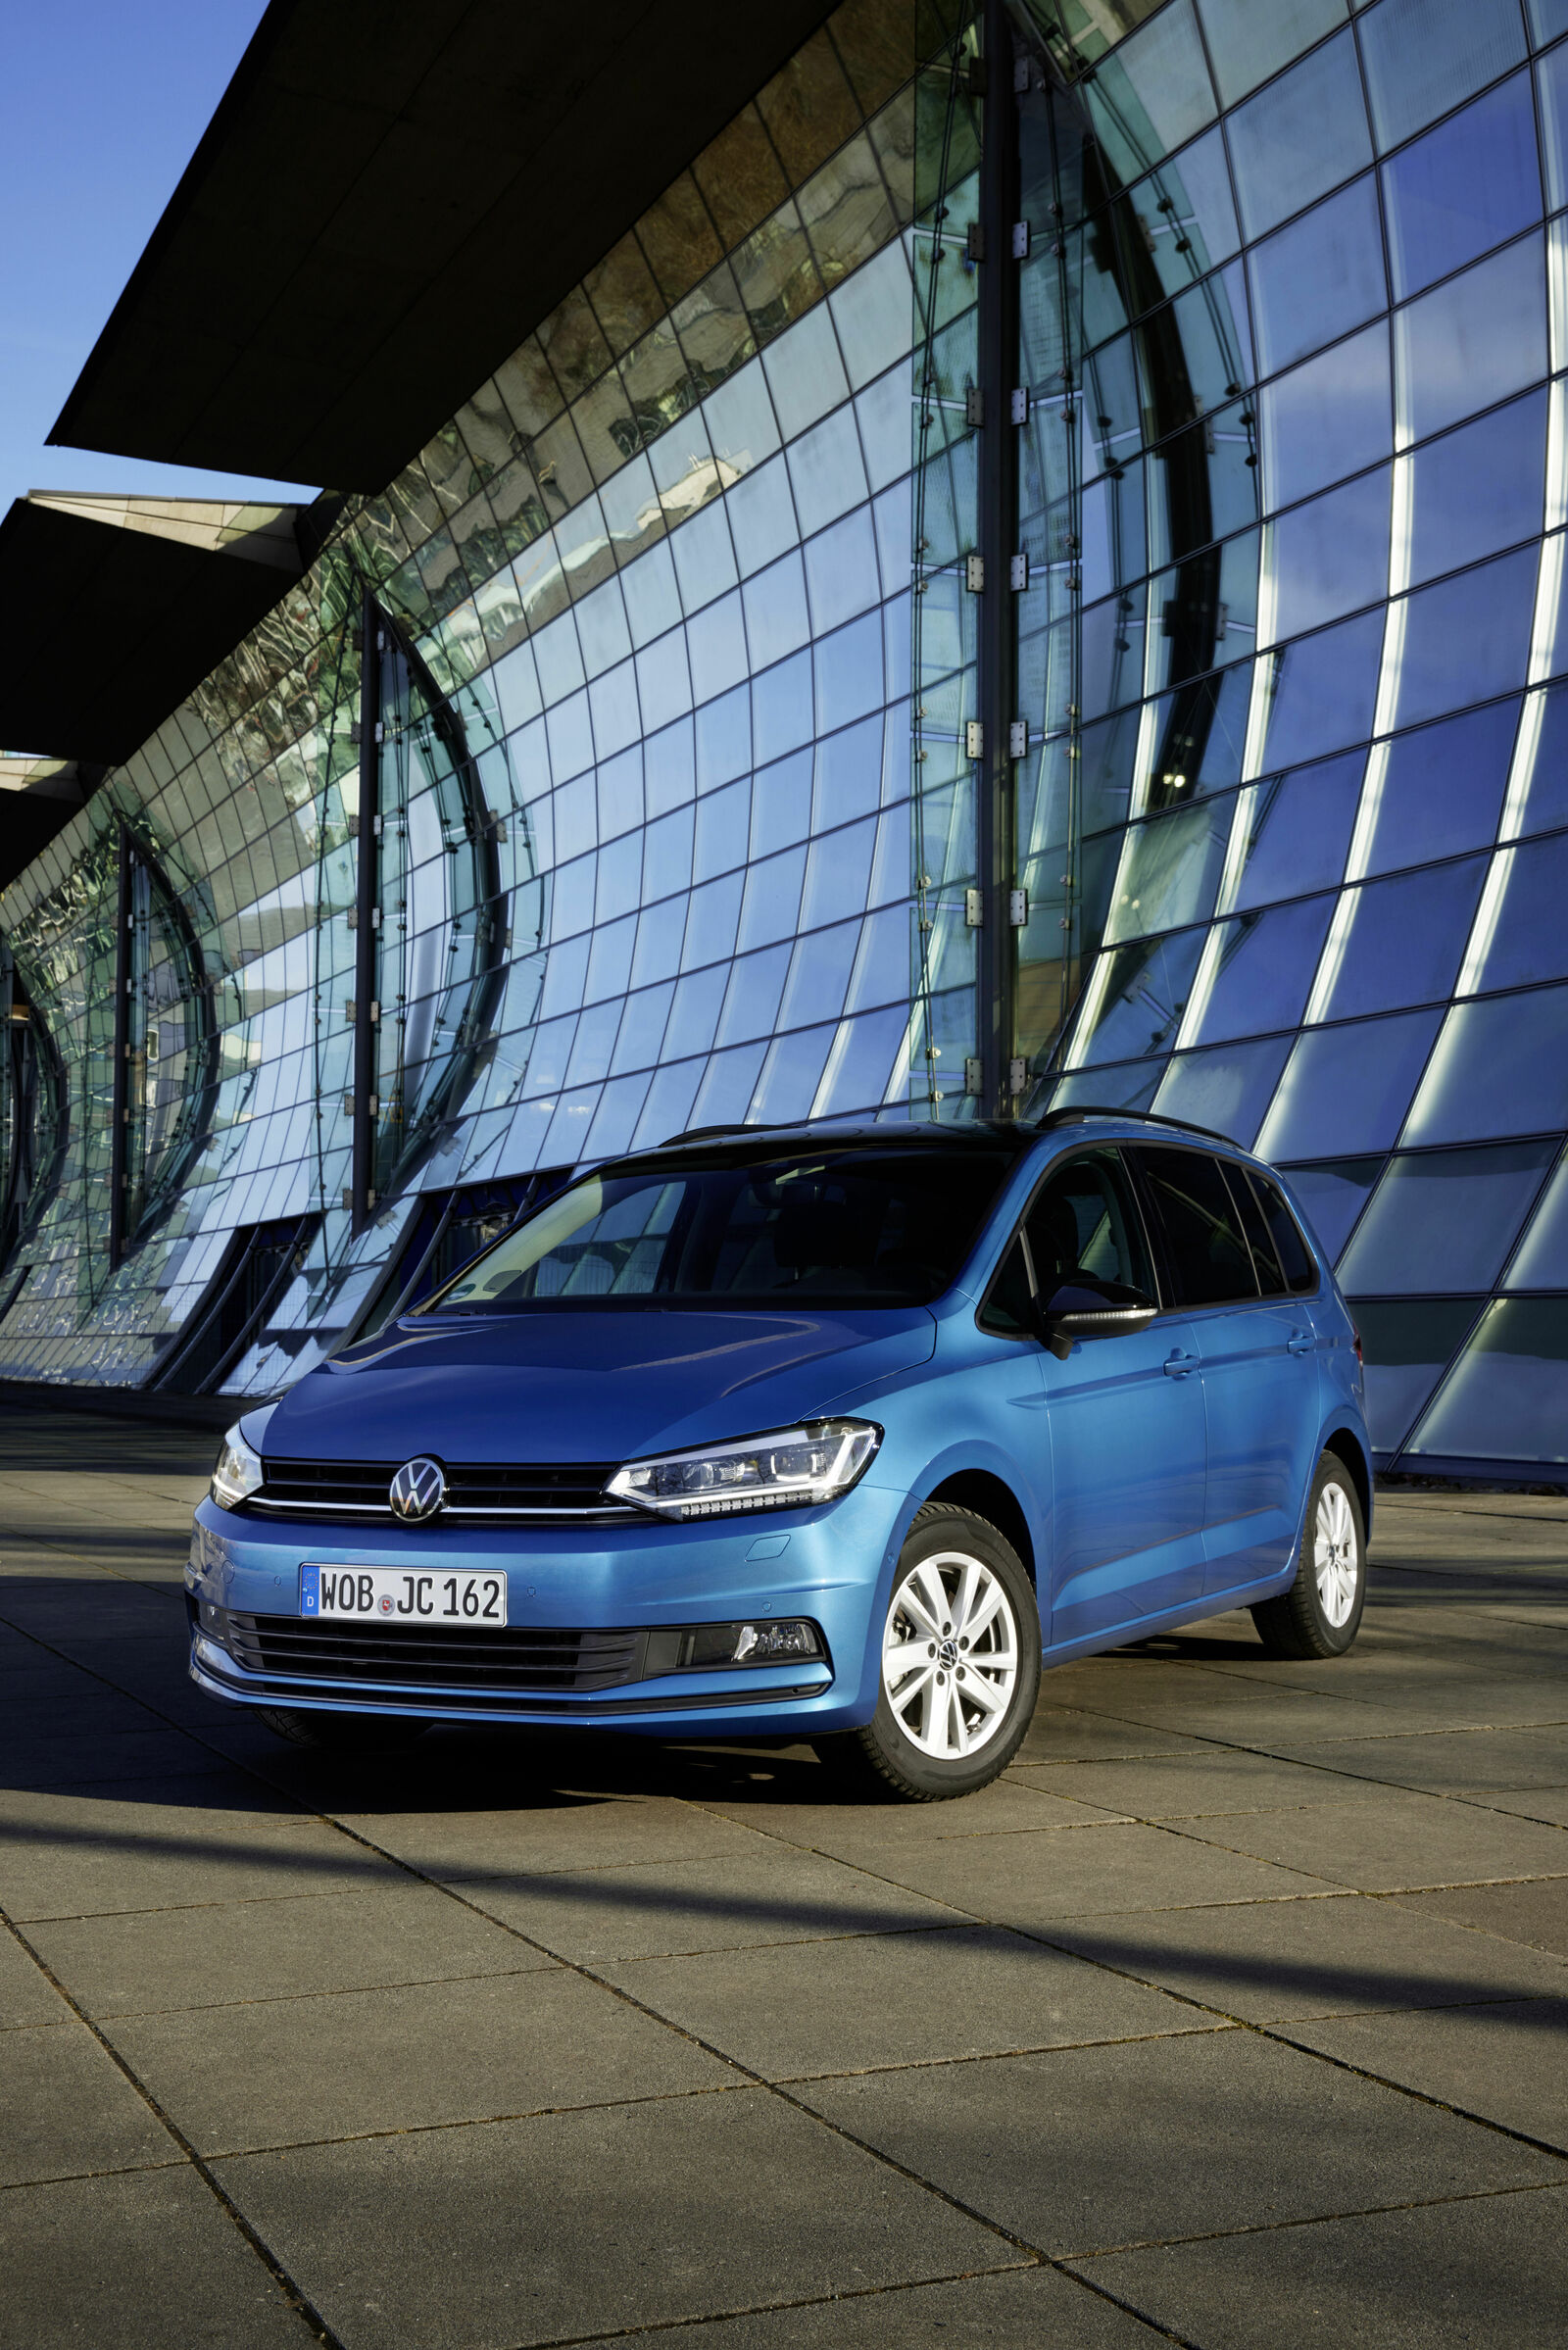 Suppliers to the new VW Touran